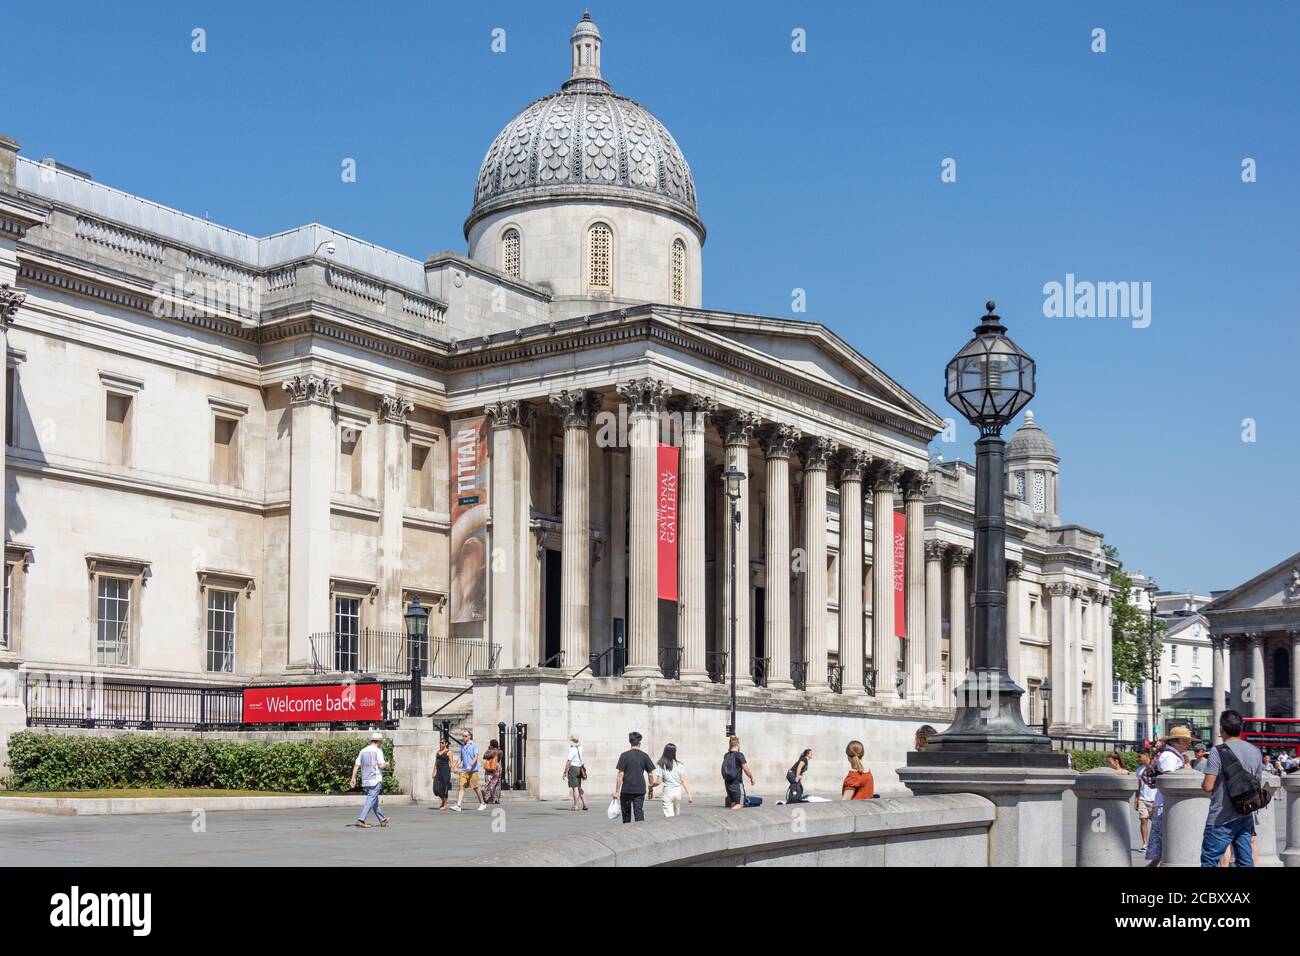 The National Gallery, Trafalgar Square, City of Westminster, Greater London, England, United Kingdom Stock Photo